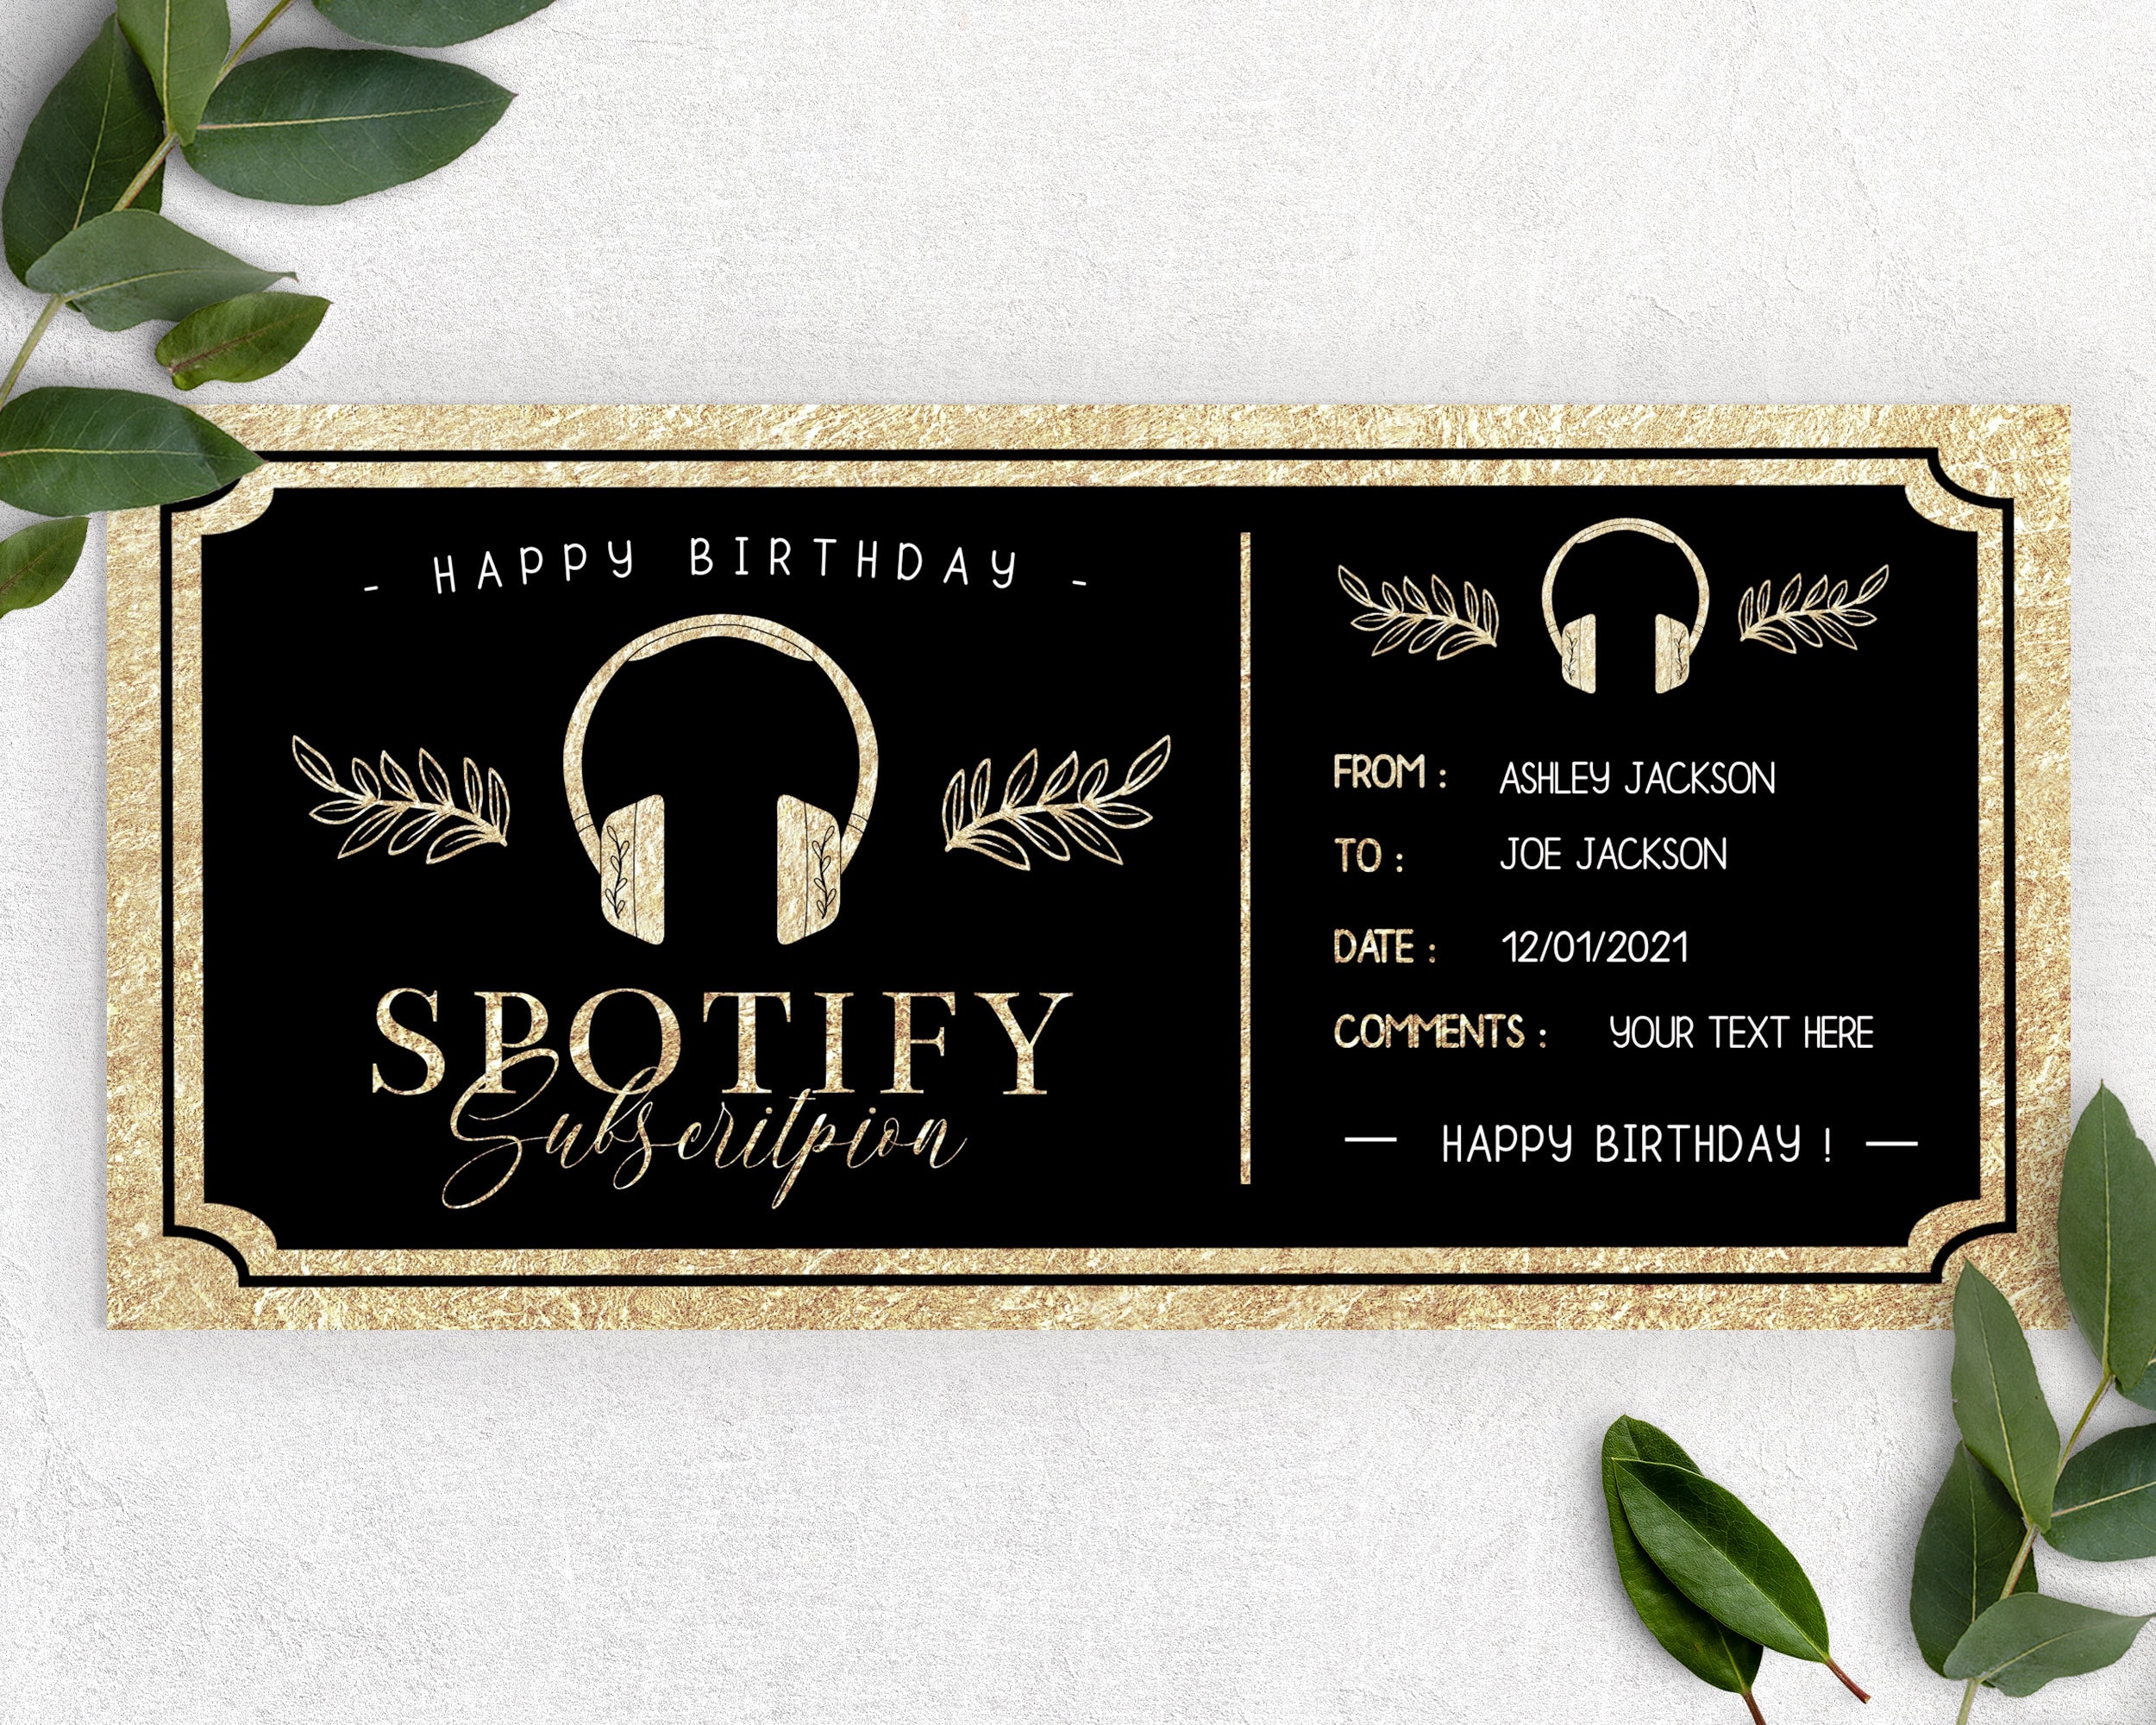 Spotify Subscription Gift Voucher, Editable Voucher, Happy Birthday, Music  Subscription Voucher, Custom Ticket, Birthday Gift Experience B5 